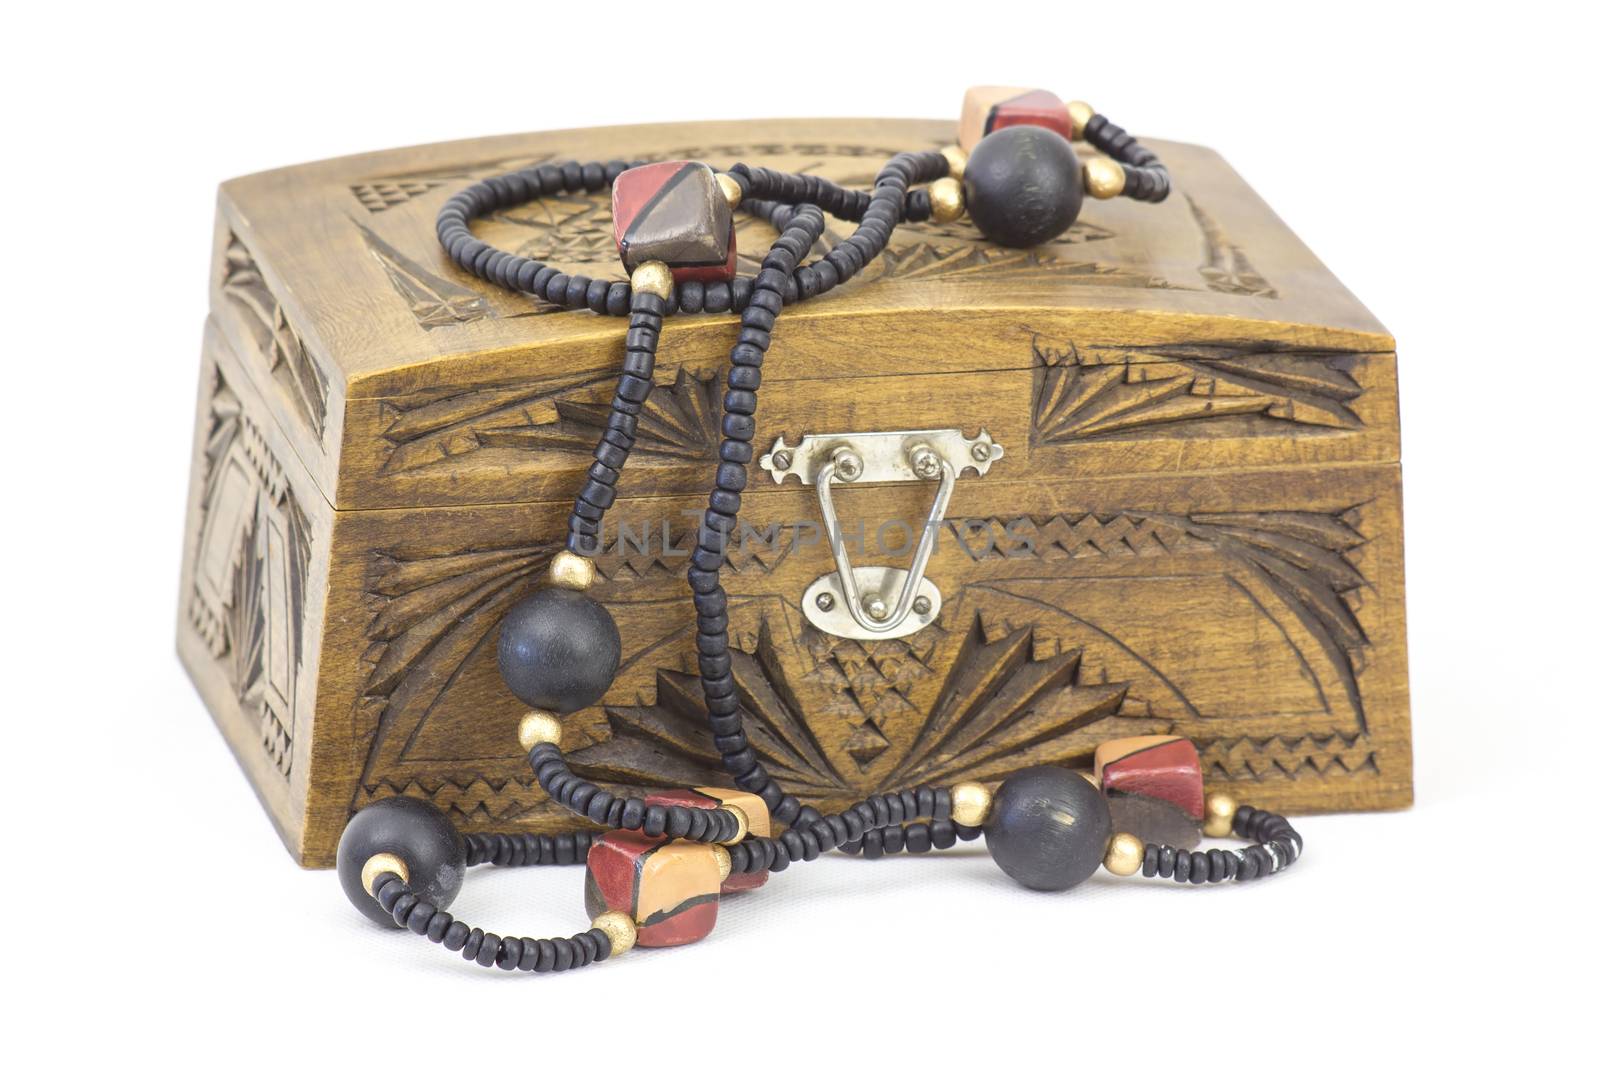 wooden casket with jewellery